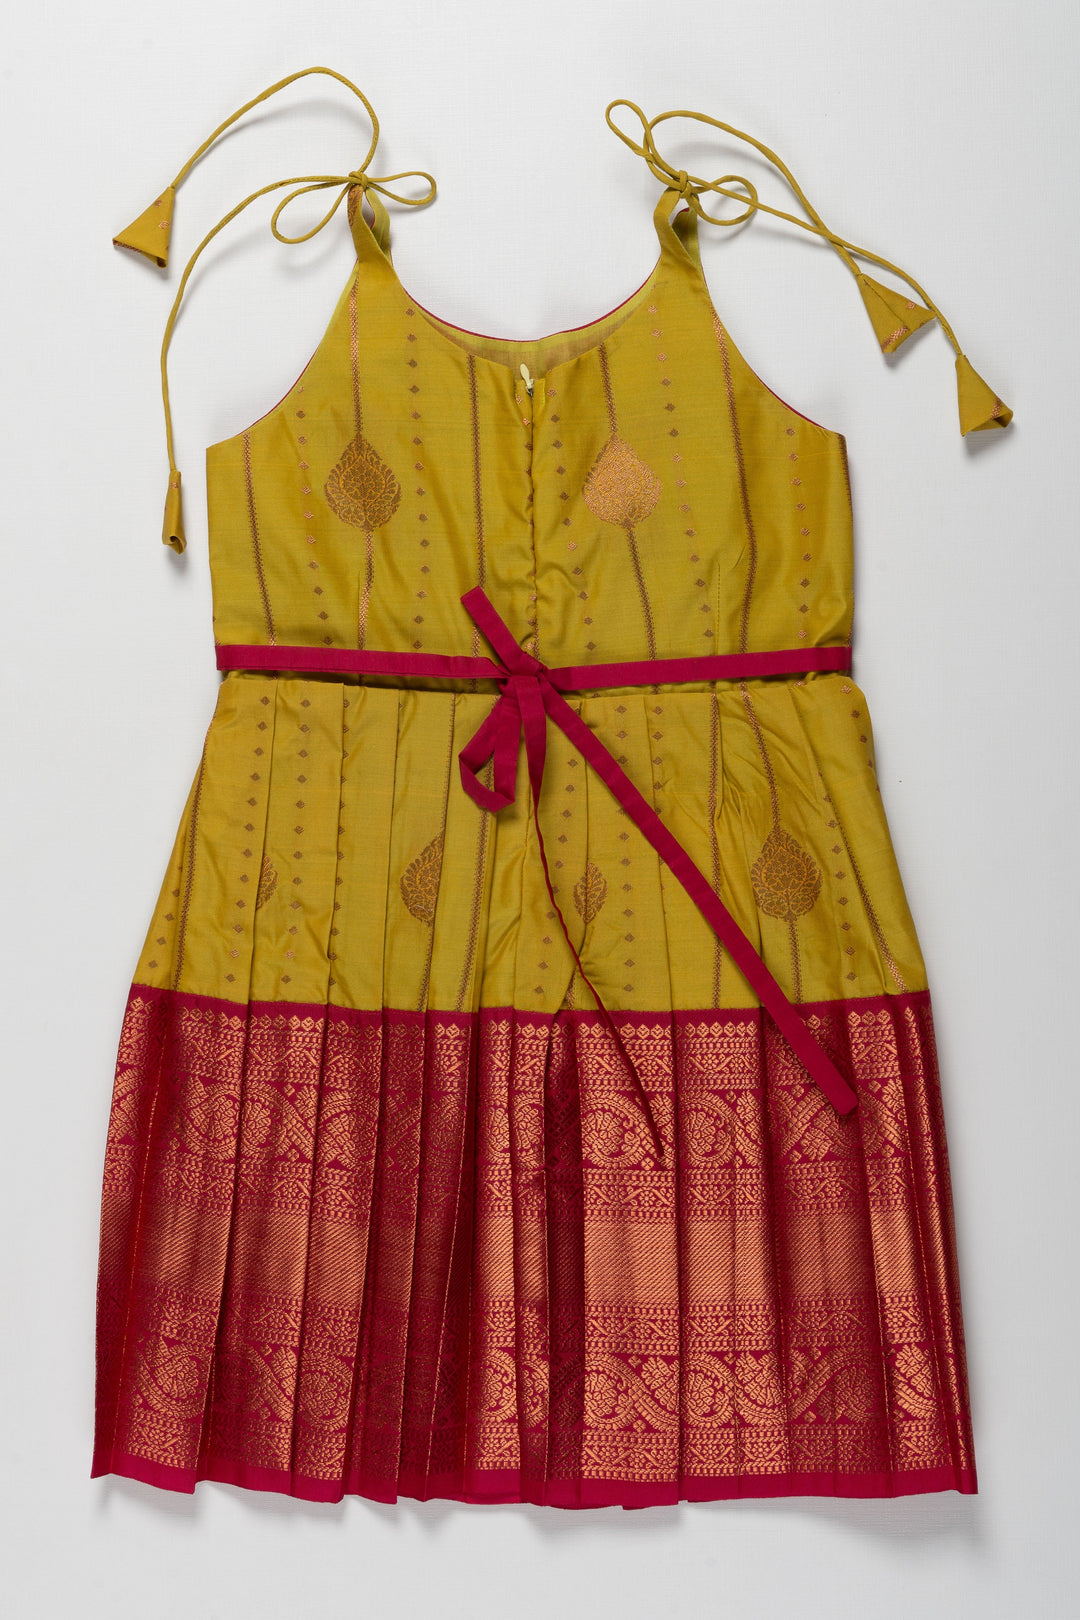 The Nesavu Tie-up Frock Radiant Red and Yellow Banarasi Tie-Up Frock for Temple Functions and Naming Ceremonies Nesavu Radiant Red and Yellow Banarasi TieUp Frock for Girls | Traditional Festive Wear | The Nesavu